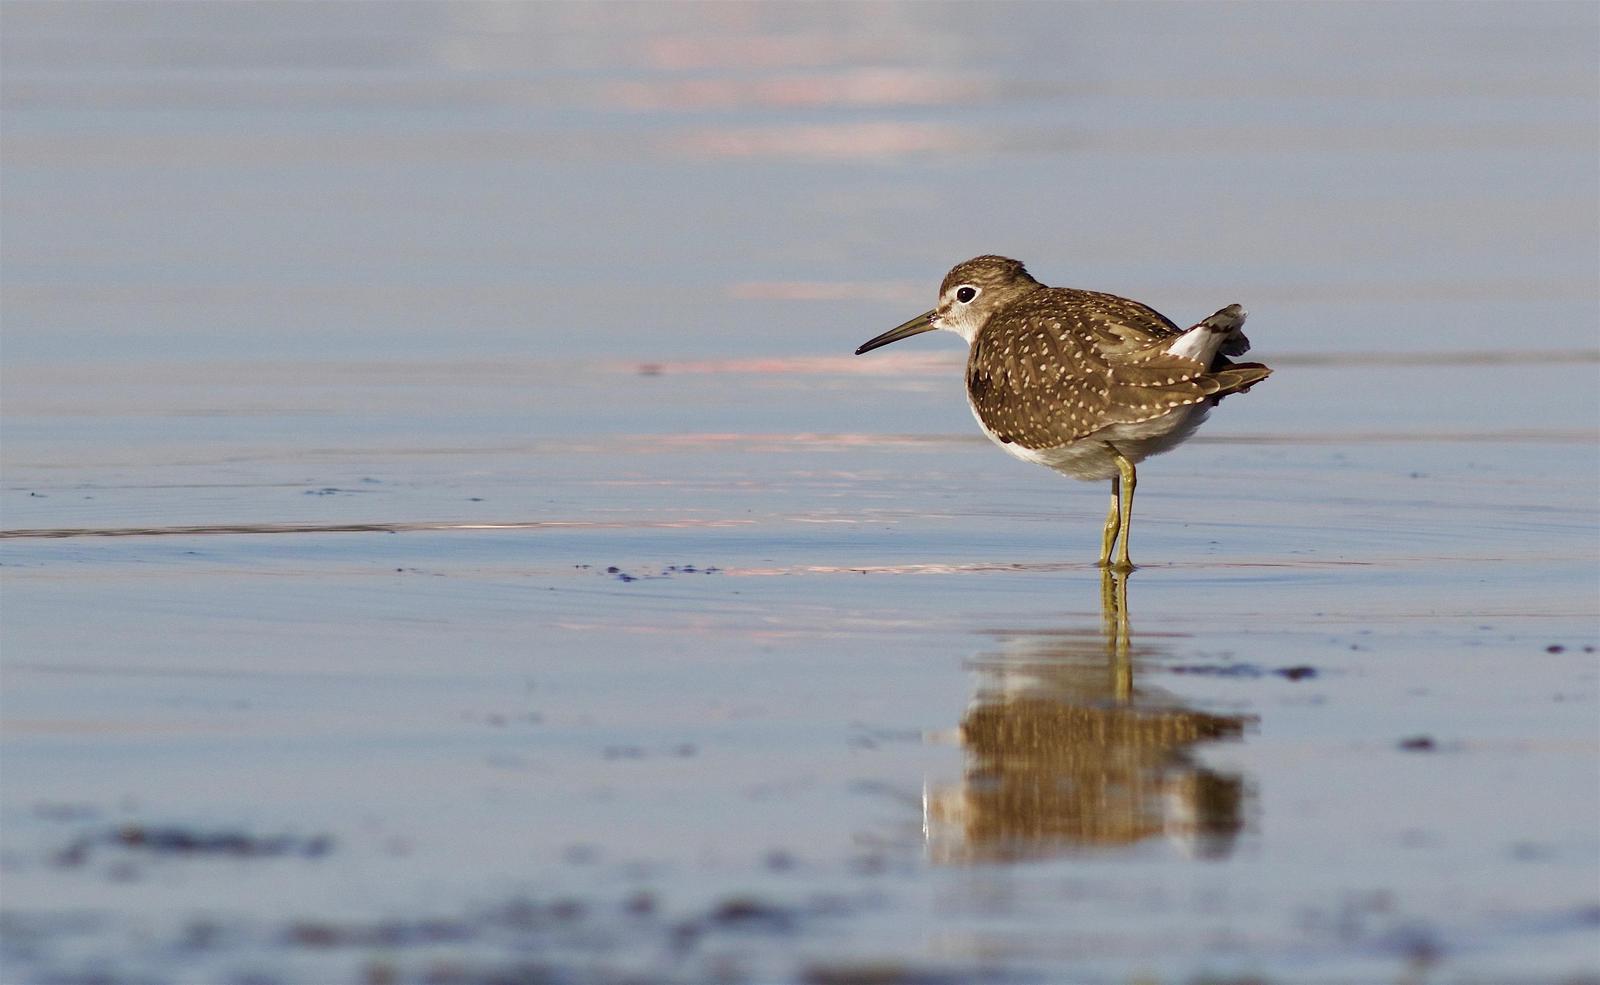 Solitary Sandpiper Photo by Kathryn Keith